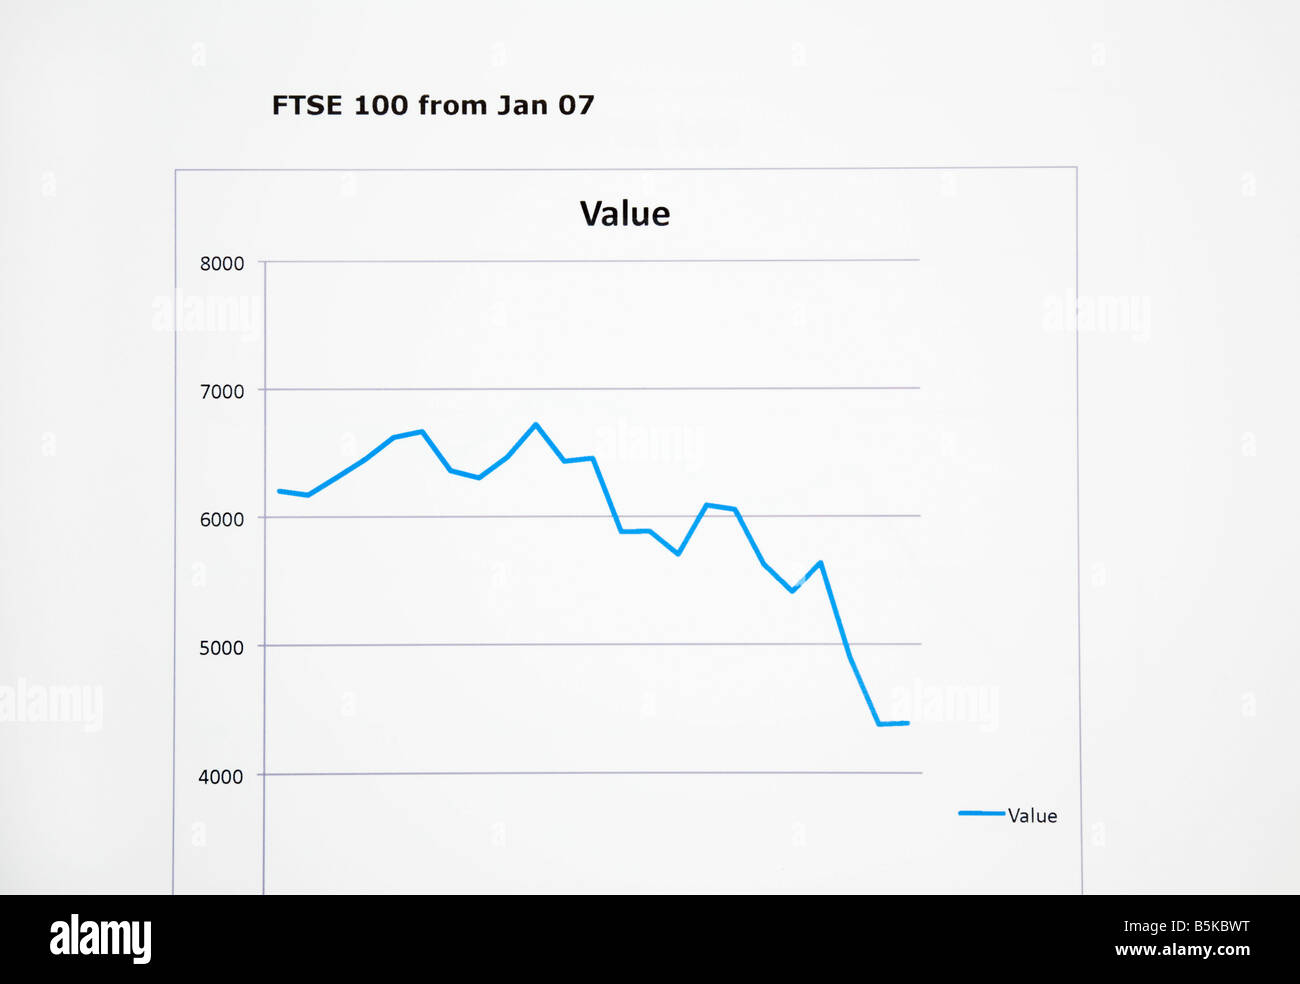 Stock market performance line graph showing FTSE 100 share prices going down from 2007 to 2008 in financial crisis. England UK Britain Stock Photo